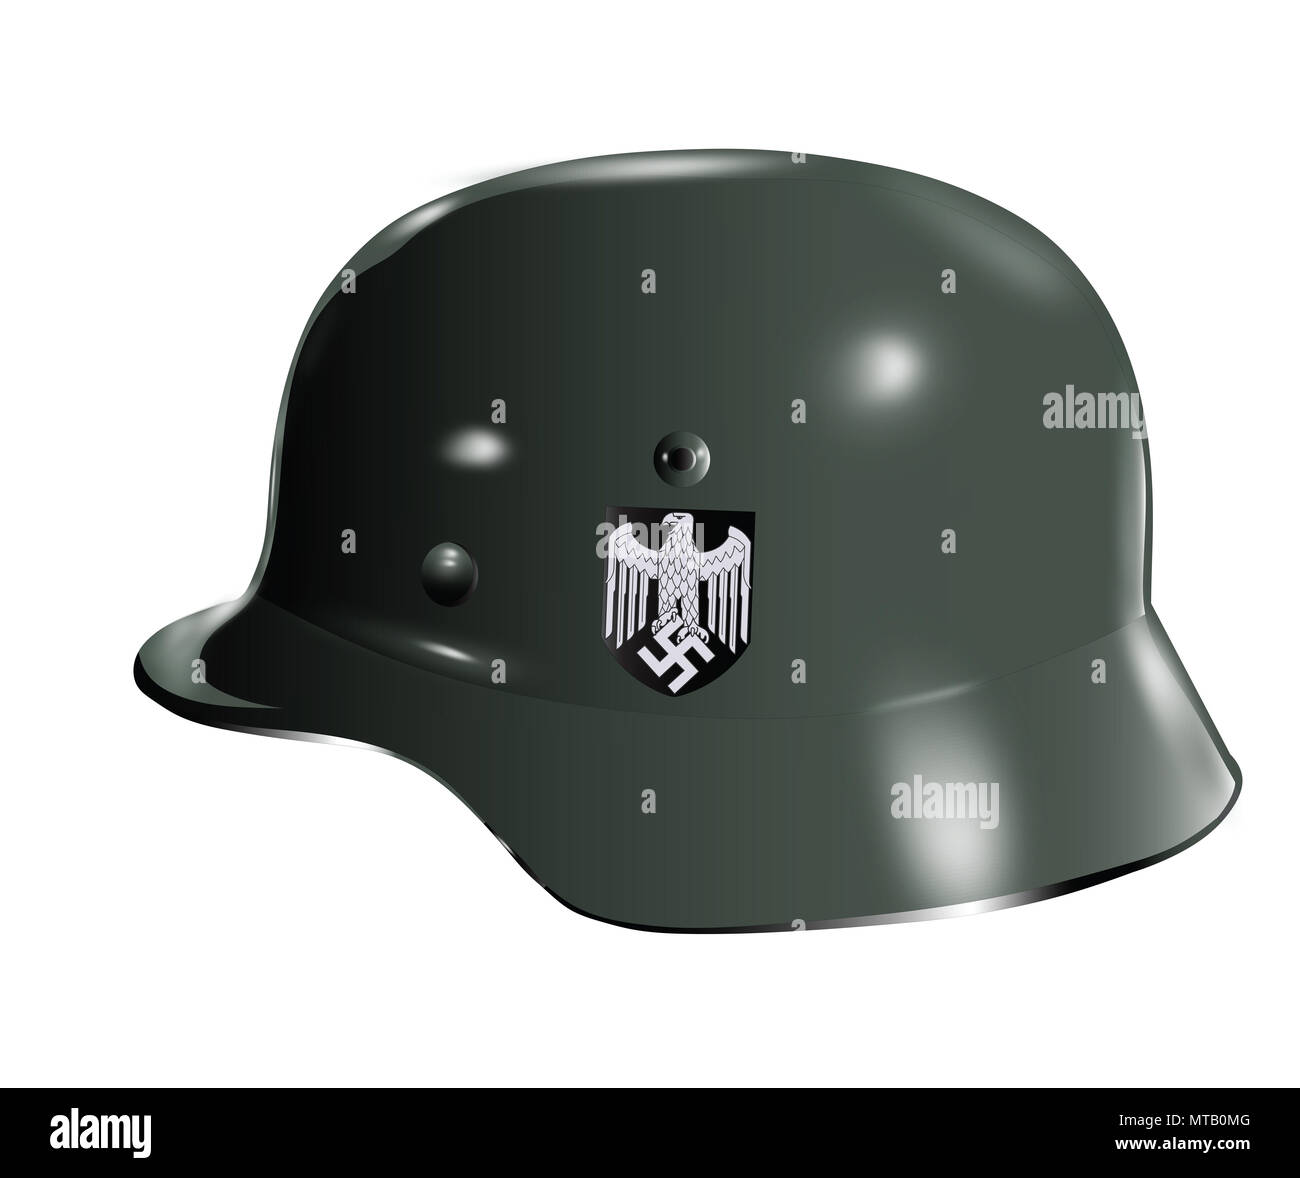 Nazi Helmet High Resolution Stock Photography and Images - Alamy